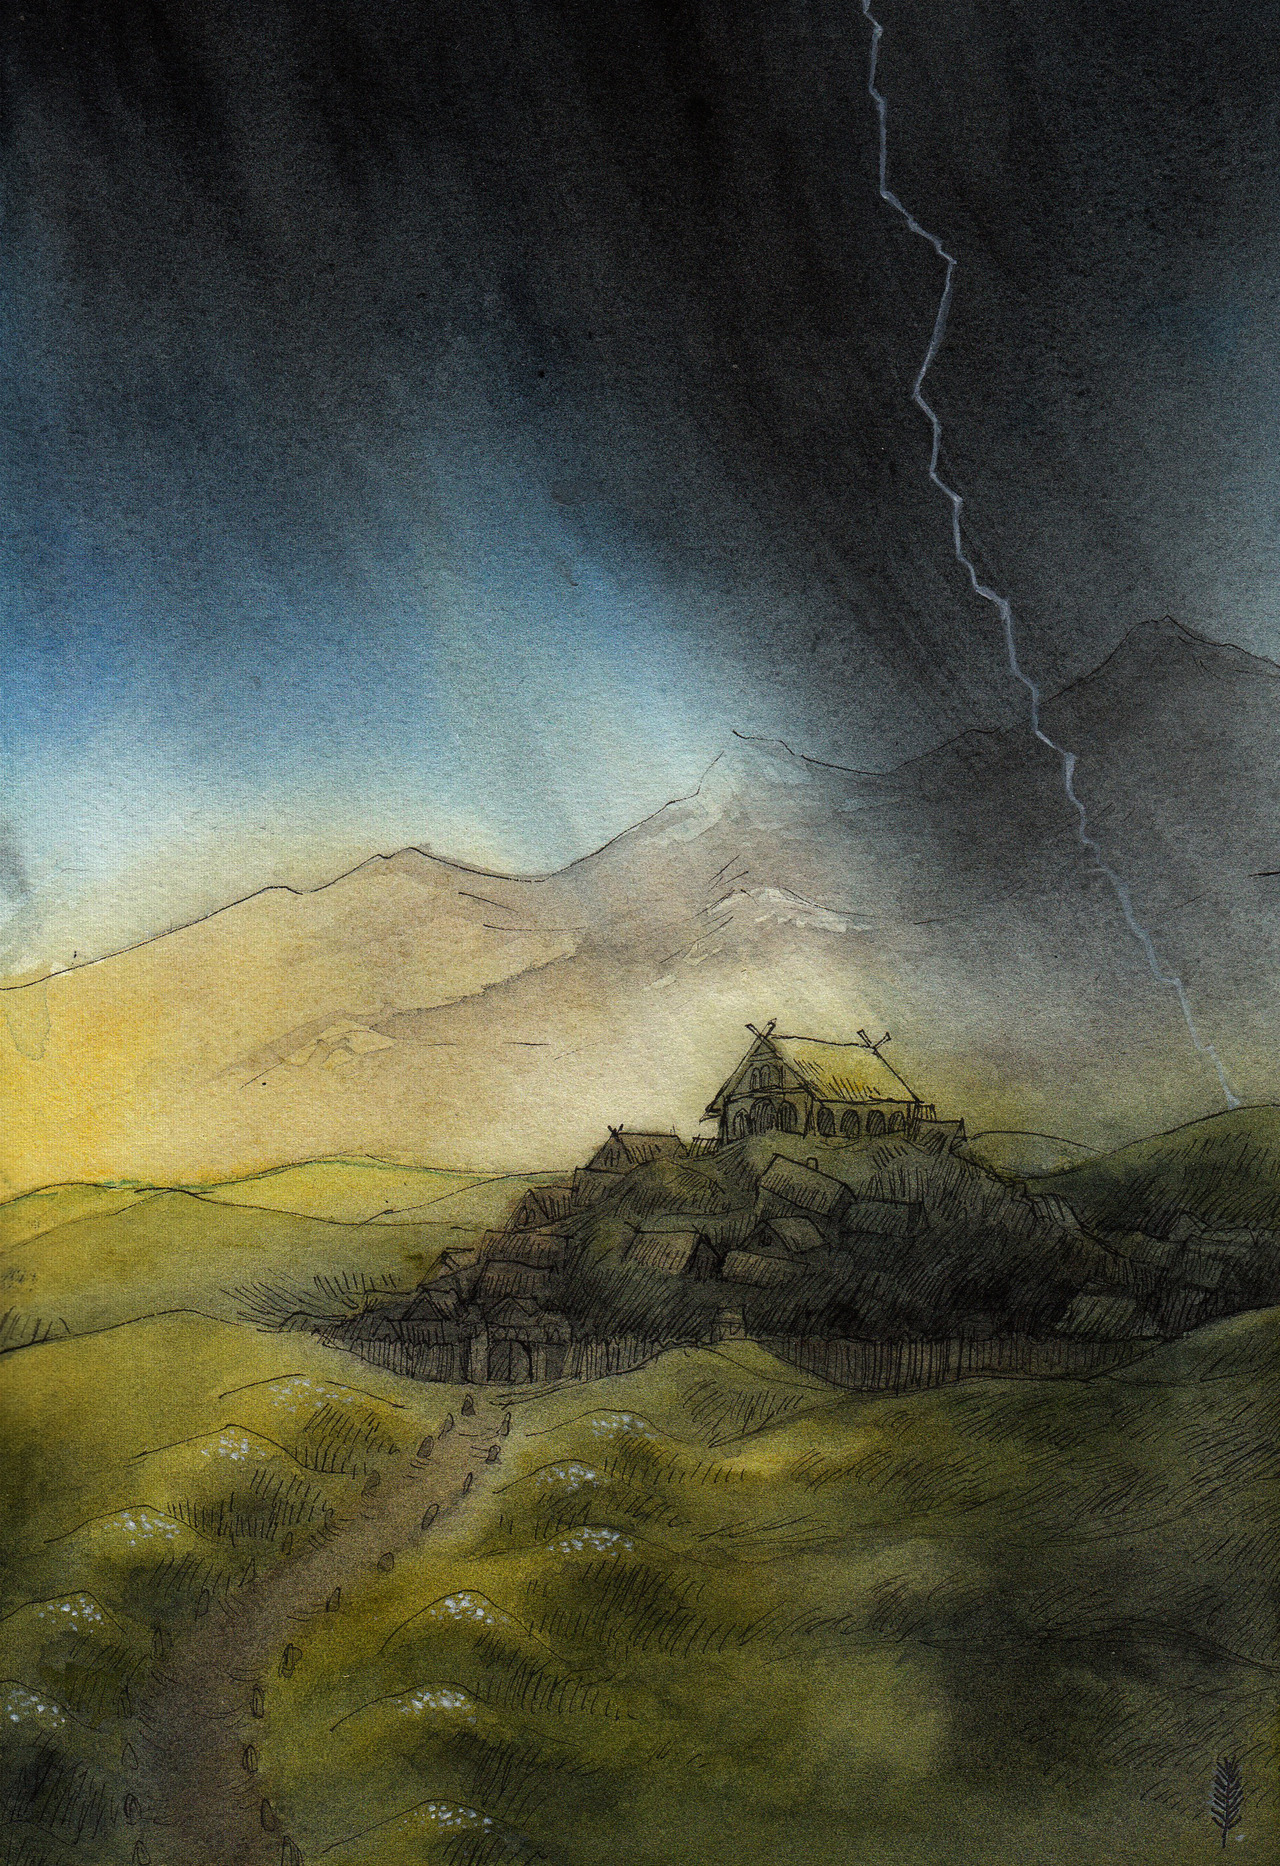 gnometheartist:
“ Edoras. The Lord of the Rings / J. R. R. Tolkien
”